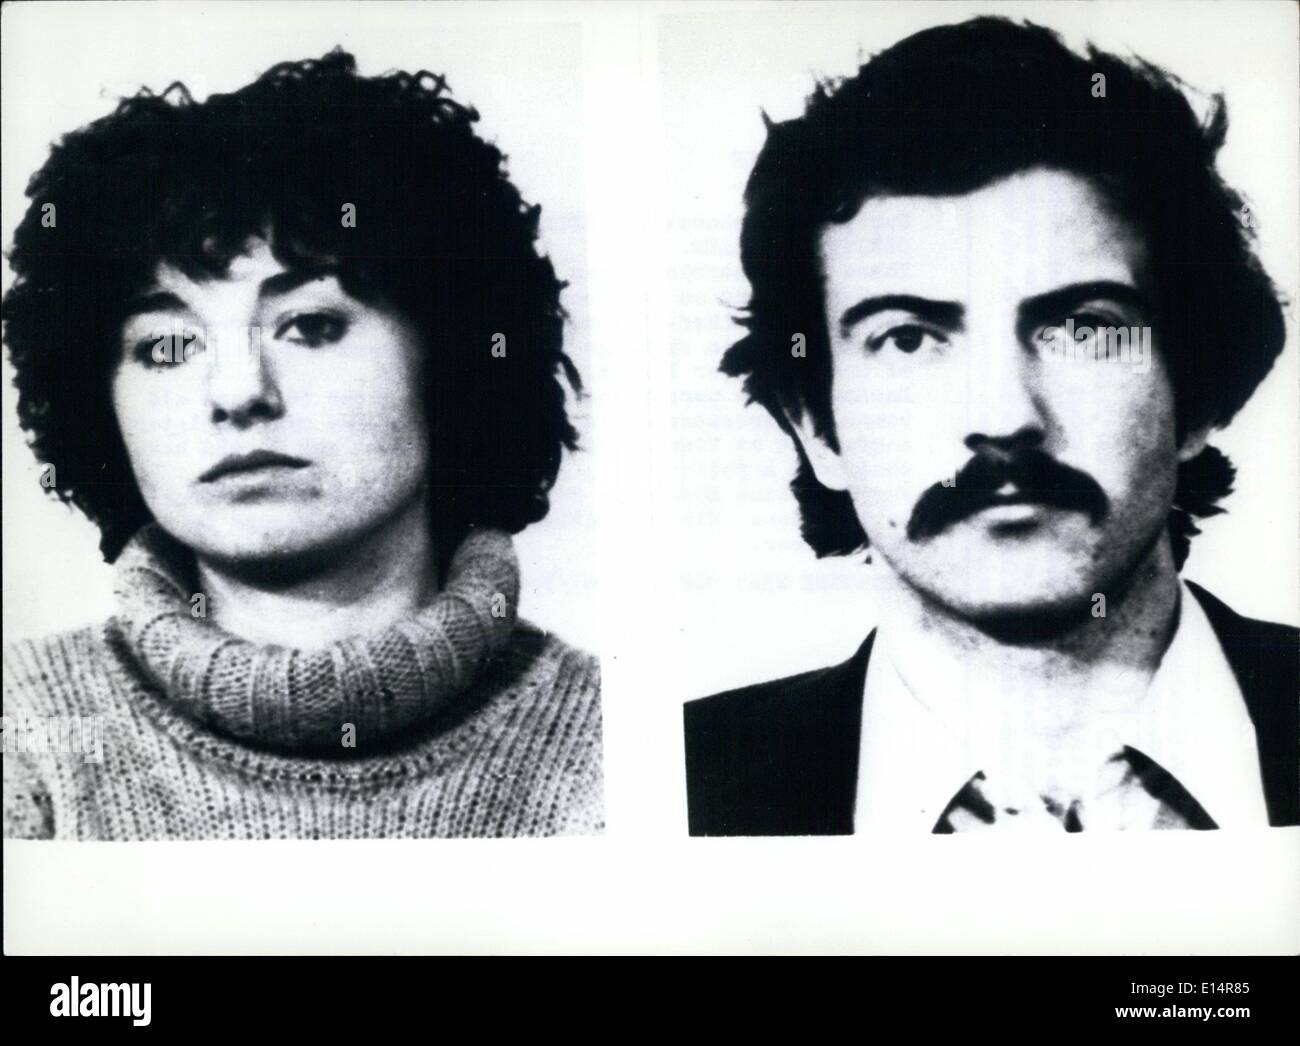 Apr. 18, 2012 - Photo shows Gabrielle Krocher-Tiedemann and Christian Moller. These two probable German terrorists could be arrested in Switzerland on December 20th, 1977. Gabrielle Krocher-Tiedemann has been arrested in Germany and get free in exchange for the kidnapped CDU-chairman of Berlin, Peter Lorenz, in spring 1975. Basing on the perception of the police, the 26 years old woman was accessoried in the assault to the OPEC-Minister-conference at Vienna two years ago. There she should have shot dead a policeman. For Christian Moller is searched because of bank-robberies in two cases Stock Photo